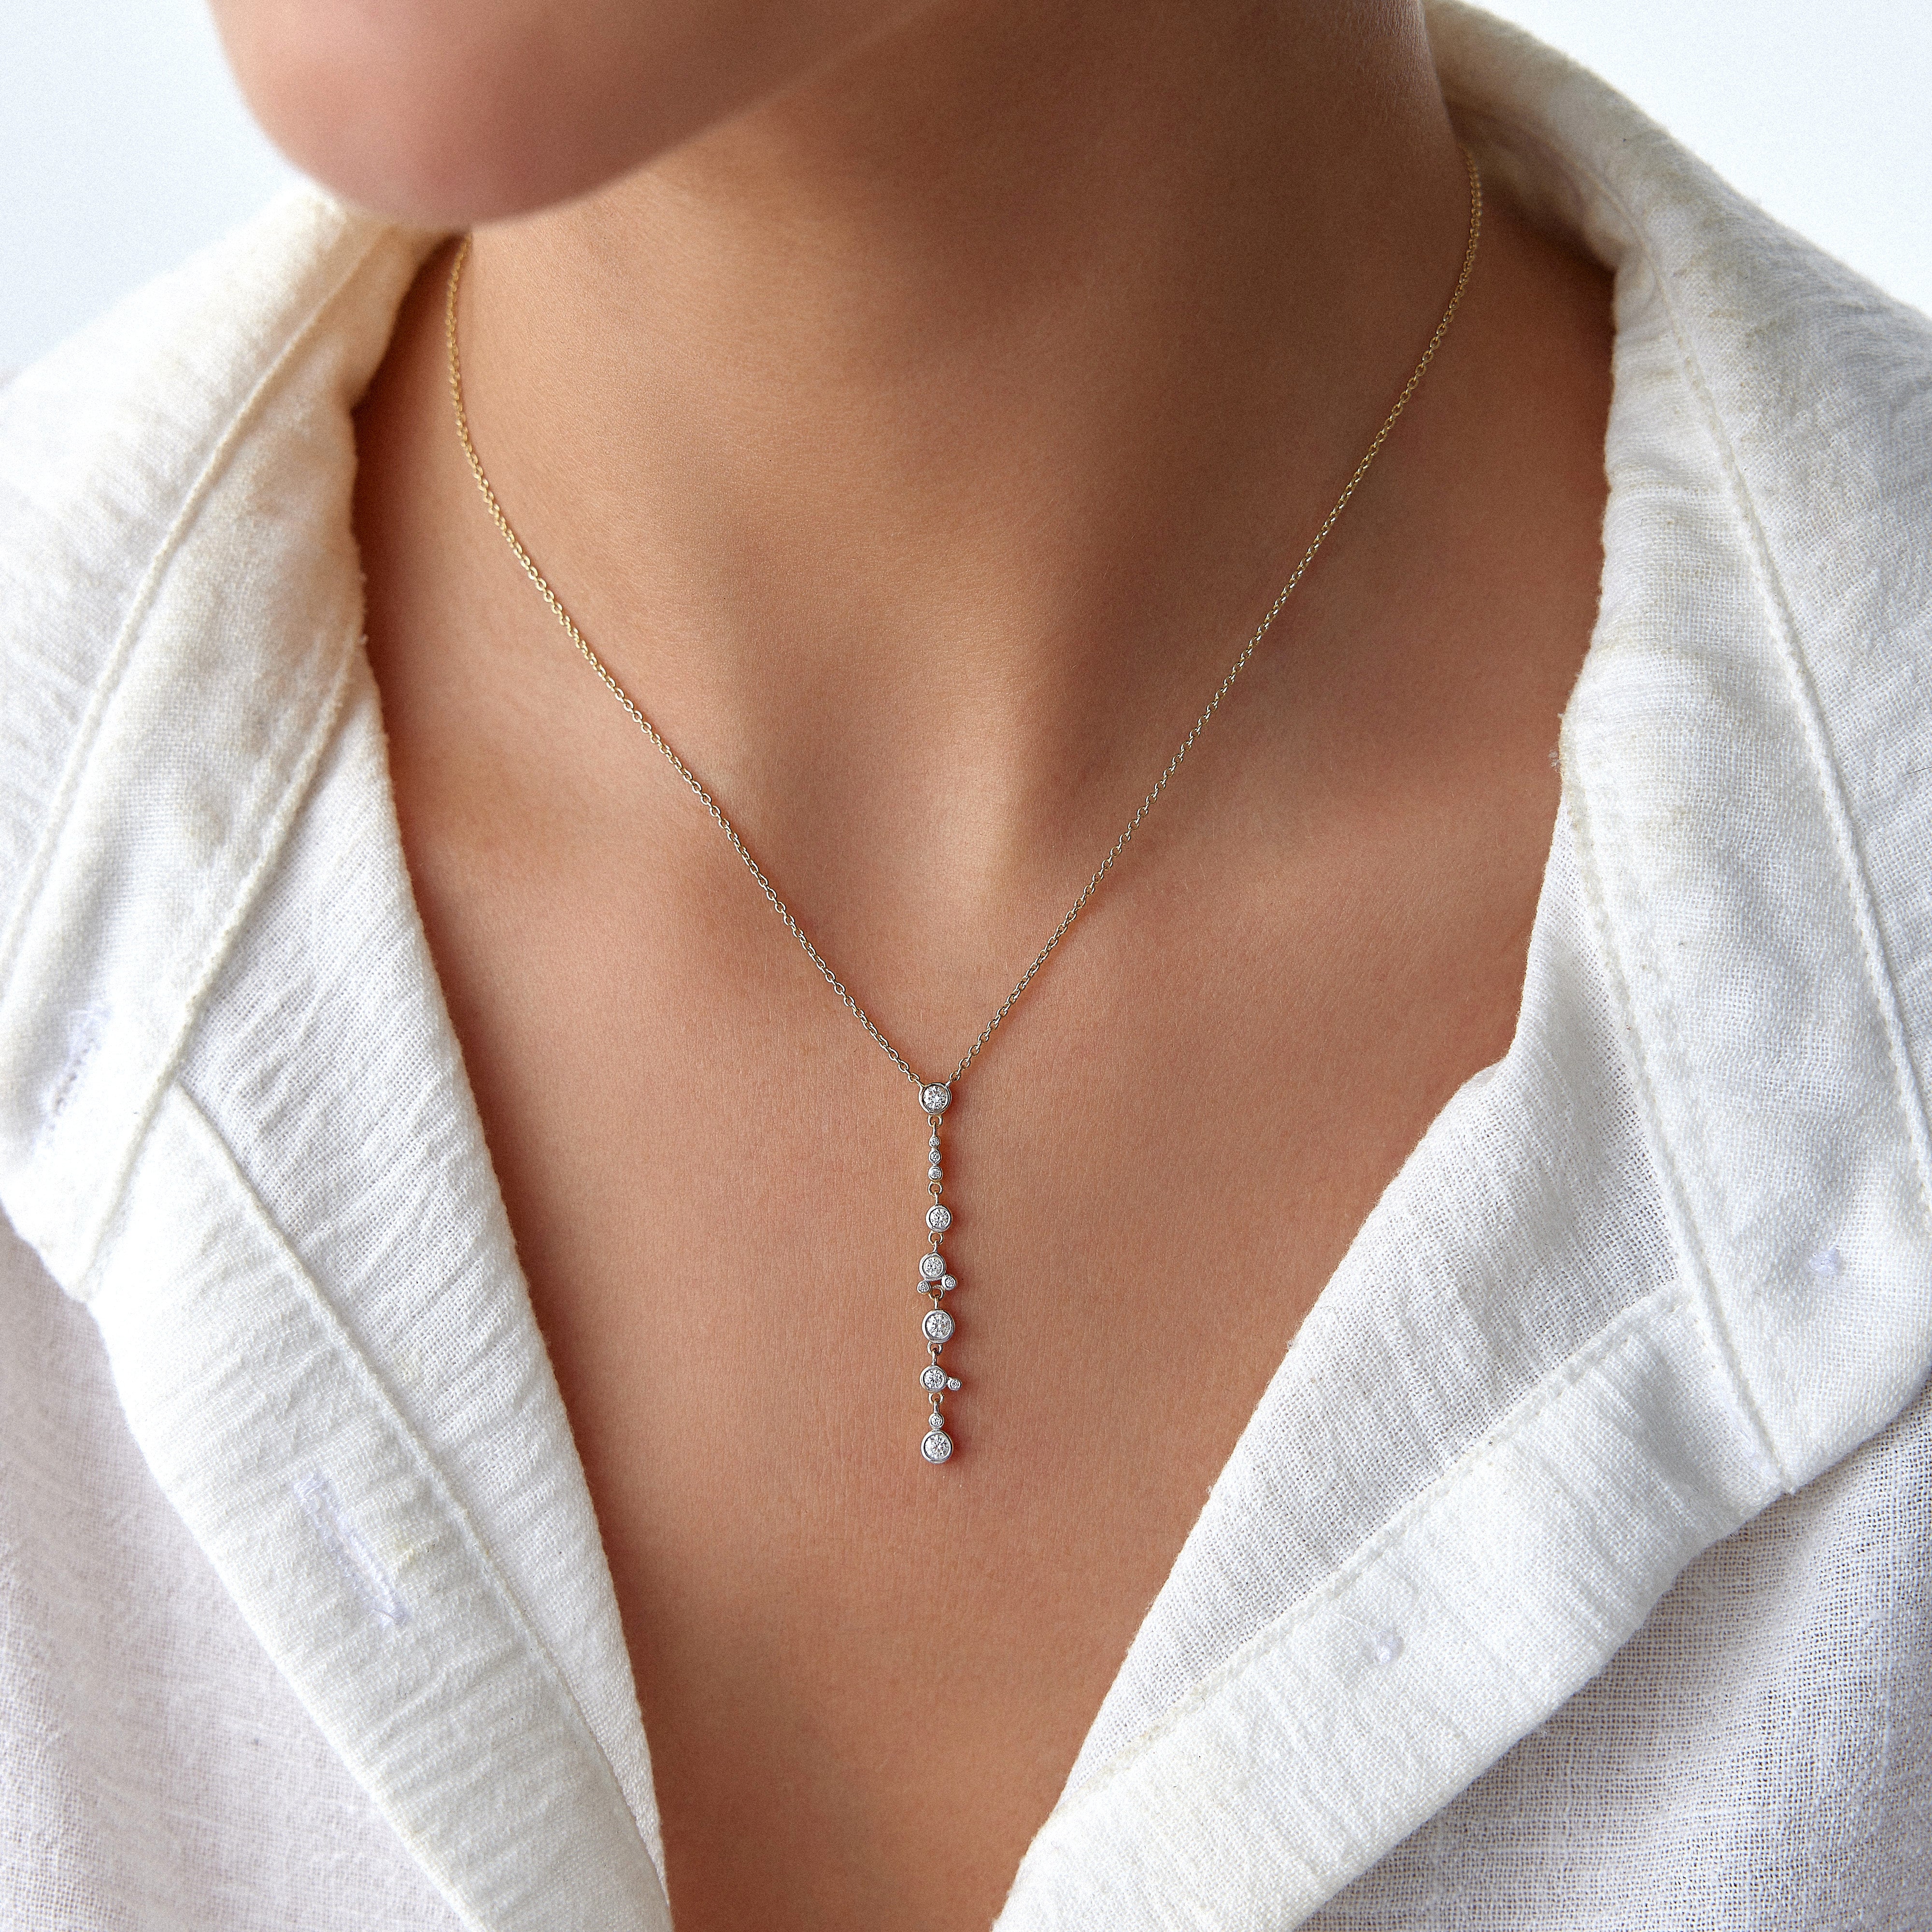 Diamond Lariat Necklace in 14K Gold / WATERFALL